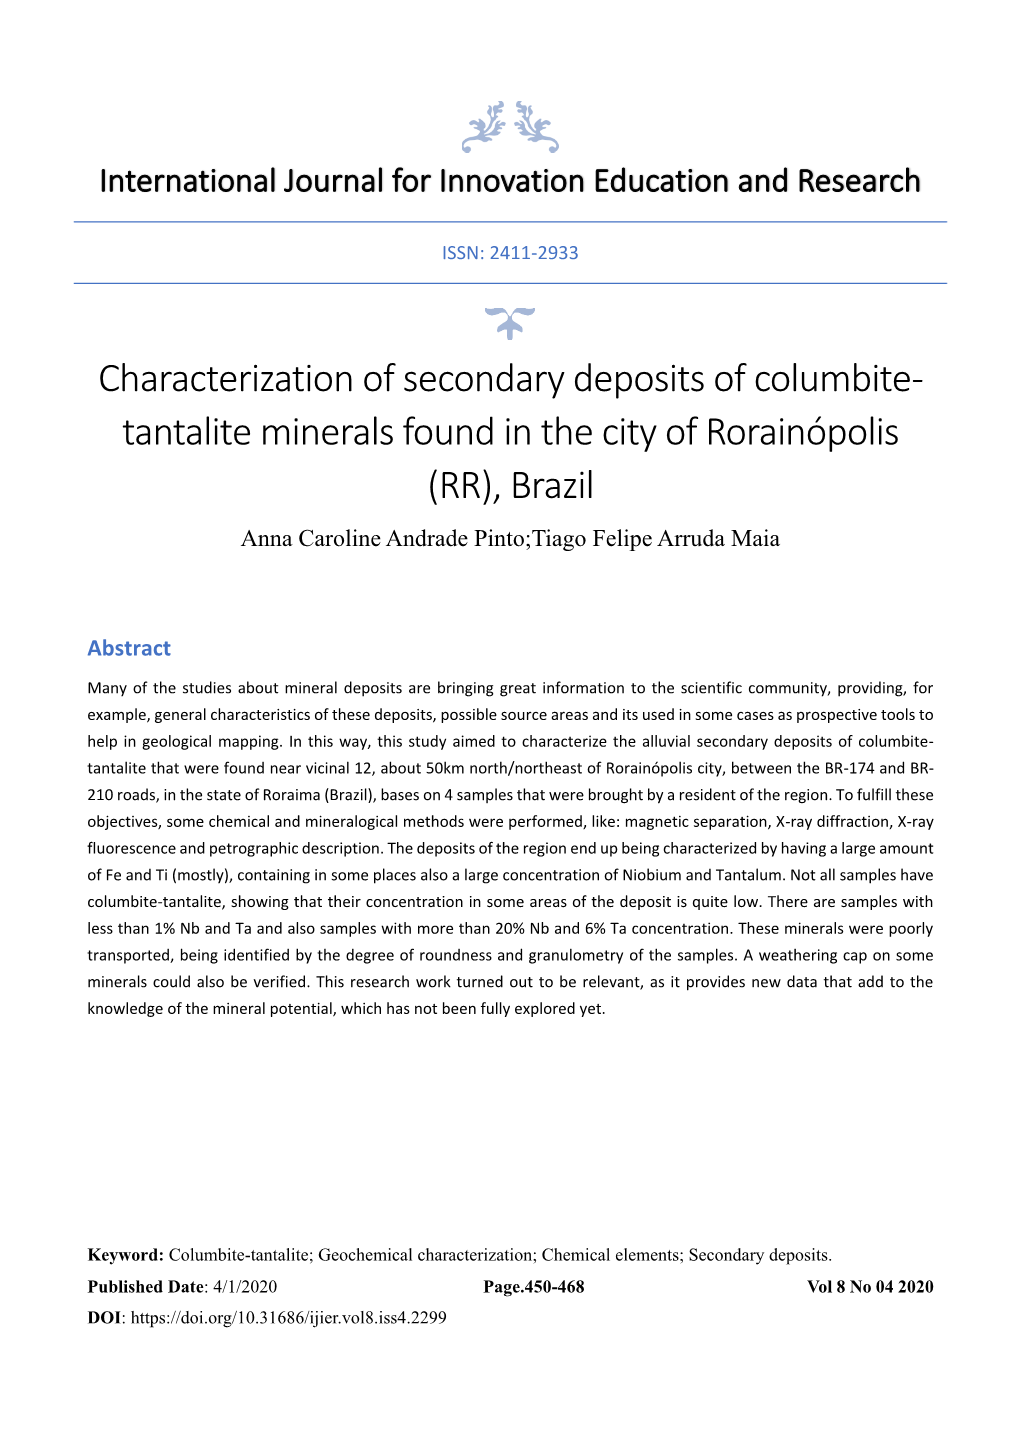 Characterization of Secondary Deposits of Columbite-Tantalite Minerals